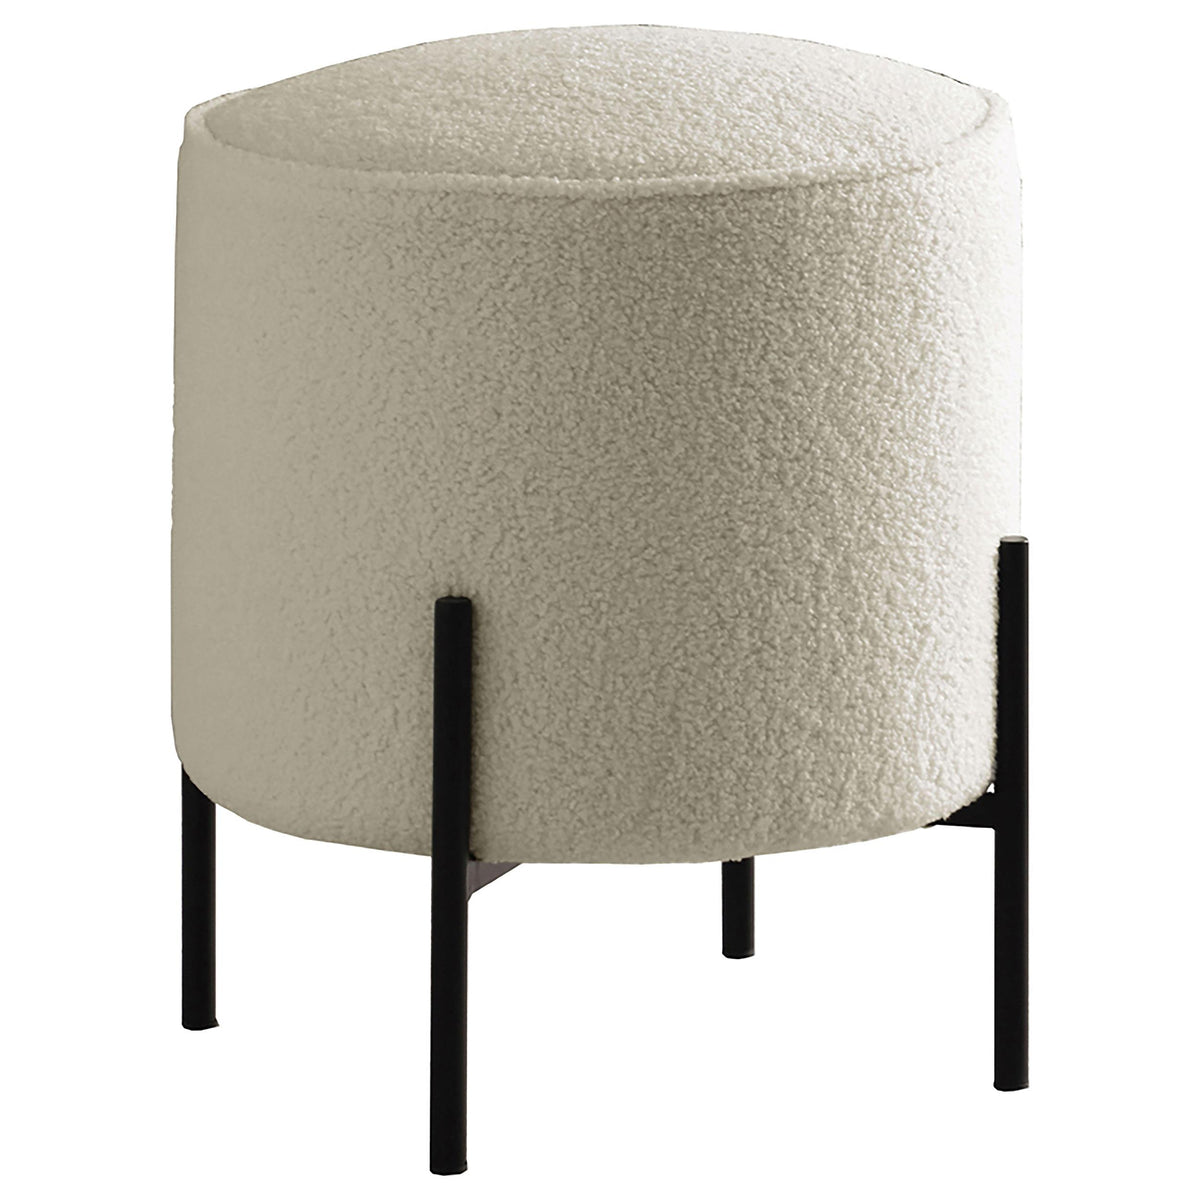 Basye Round Upholstered Ottoman Beige and Matte Black  Las Vegas Furniture Stores